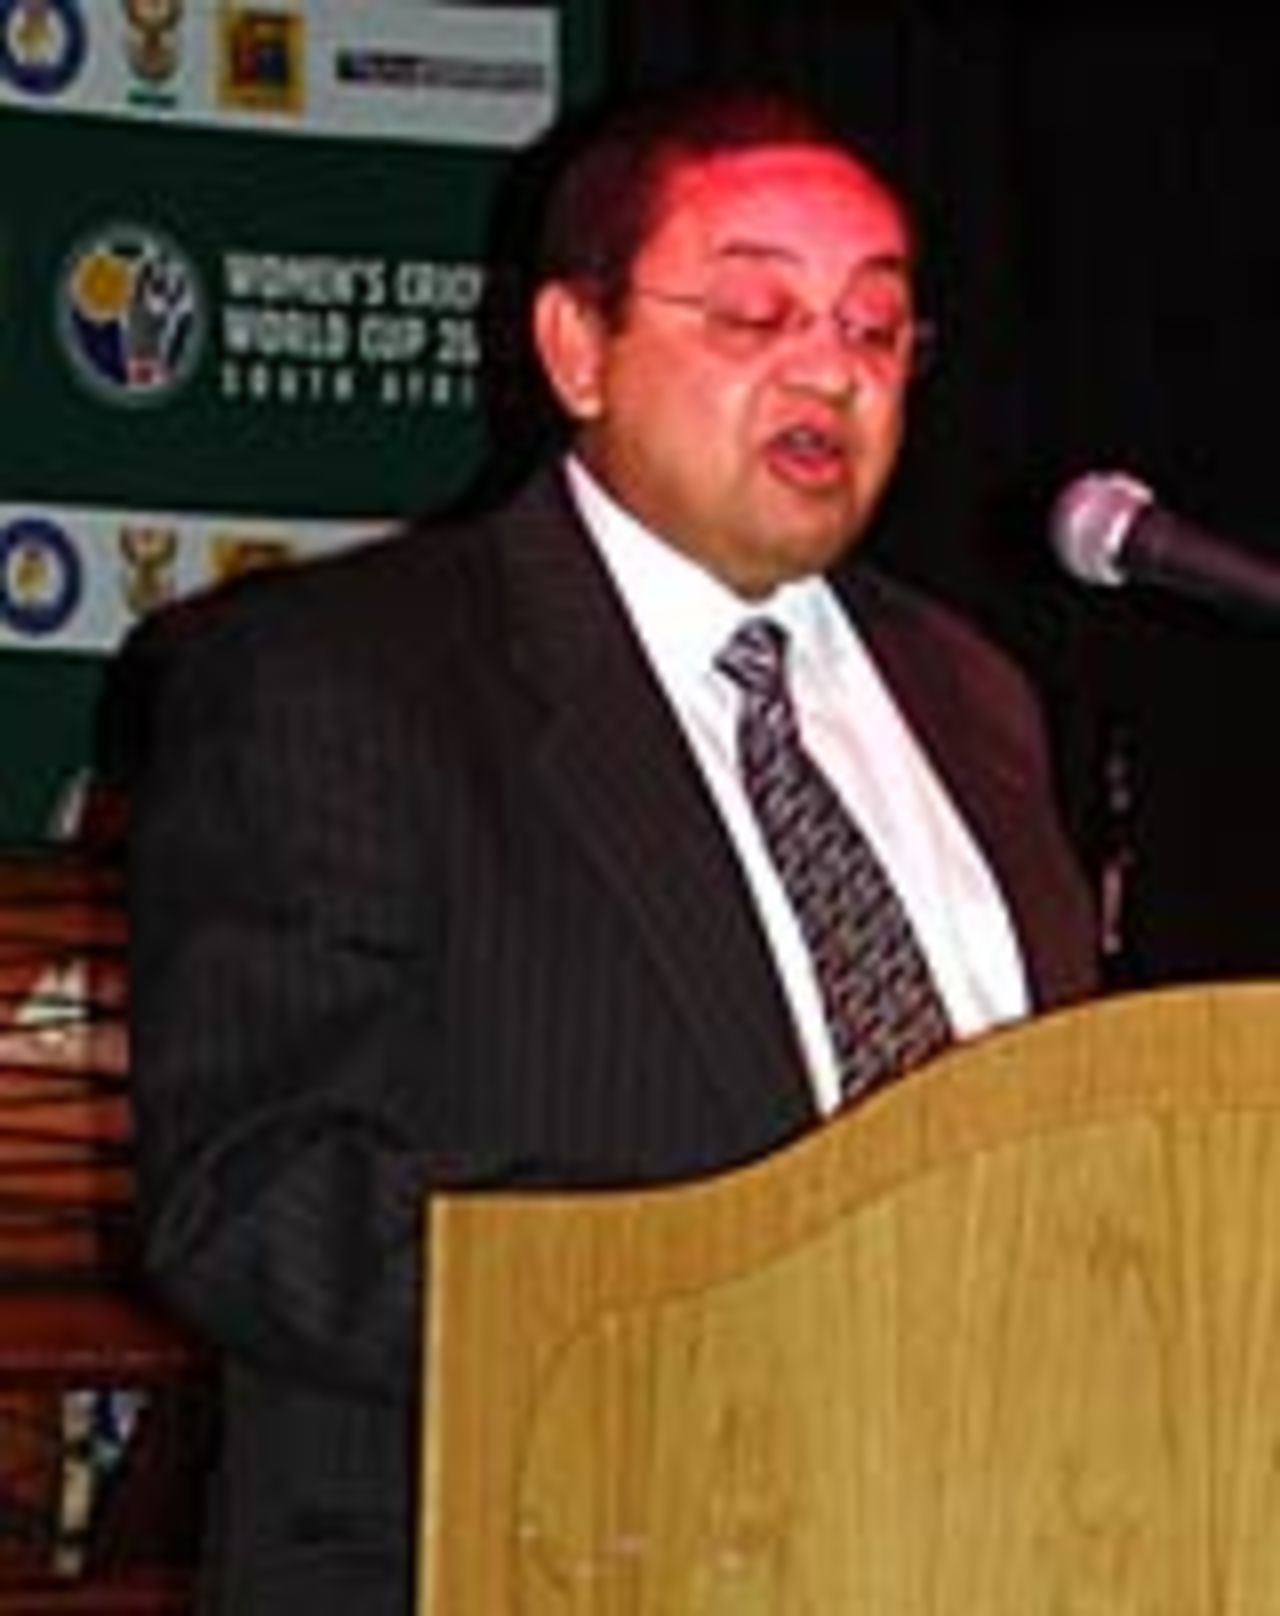 Percy Sonn addresses the teams at the opening of the 2005 Women's World Cup, Johannesburg, March 21, 2005